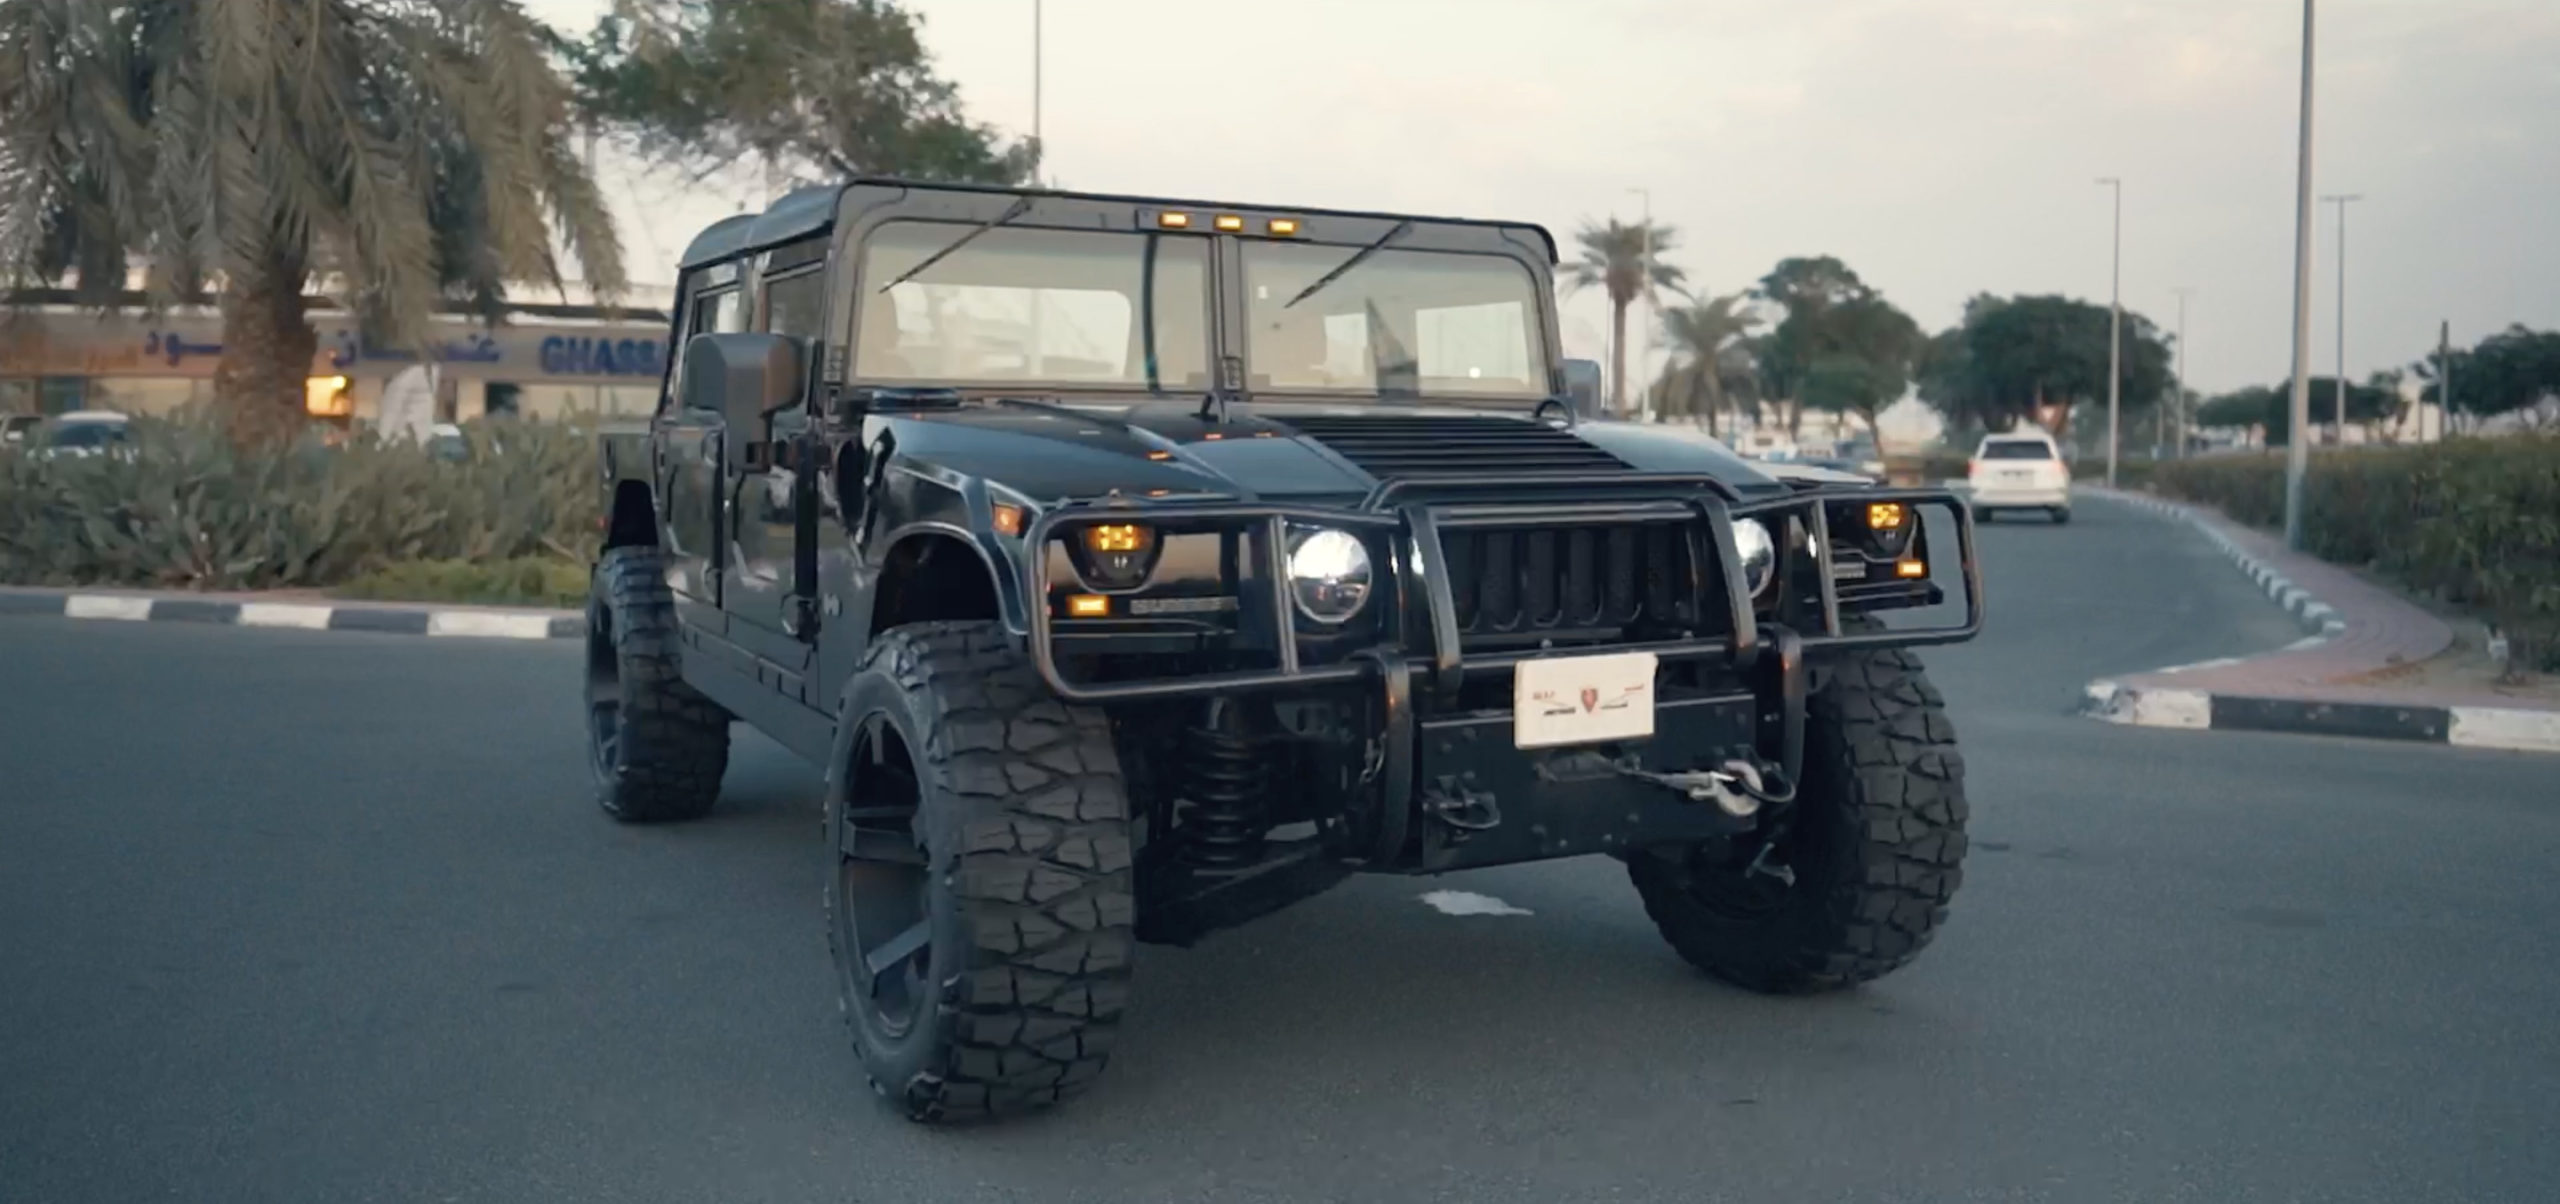 DubiCars Exotic Car Of The Week — Hummer H1: A One-Of-20 Exclusive With Aircraft-Grade Body Panels